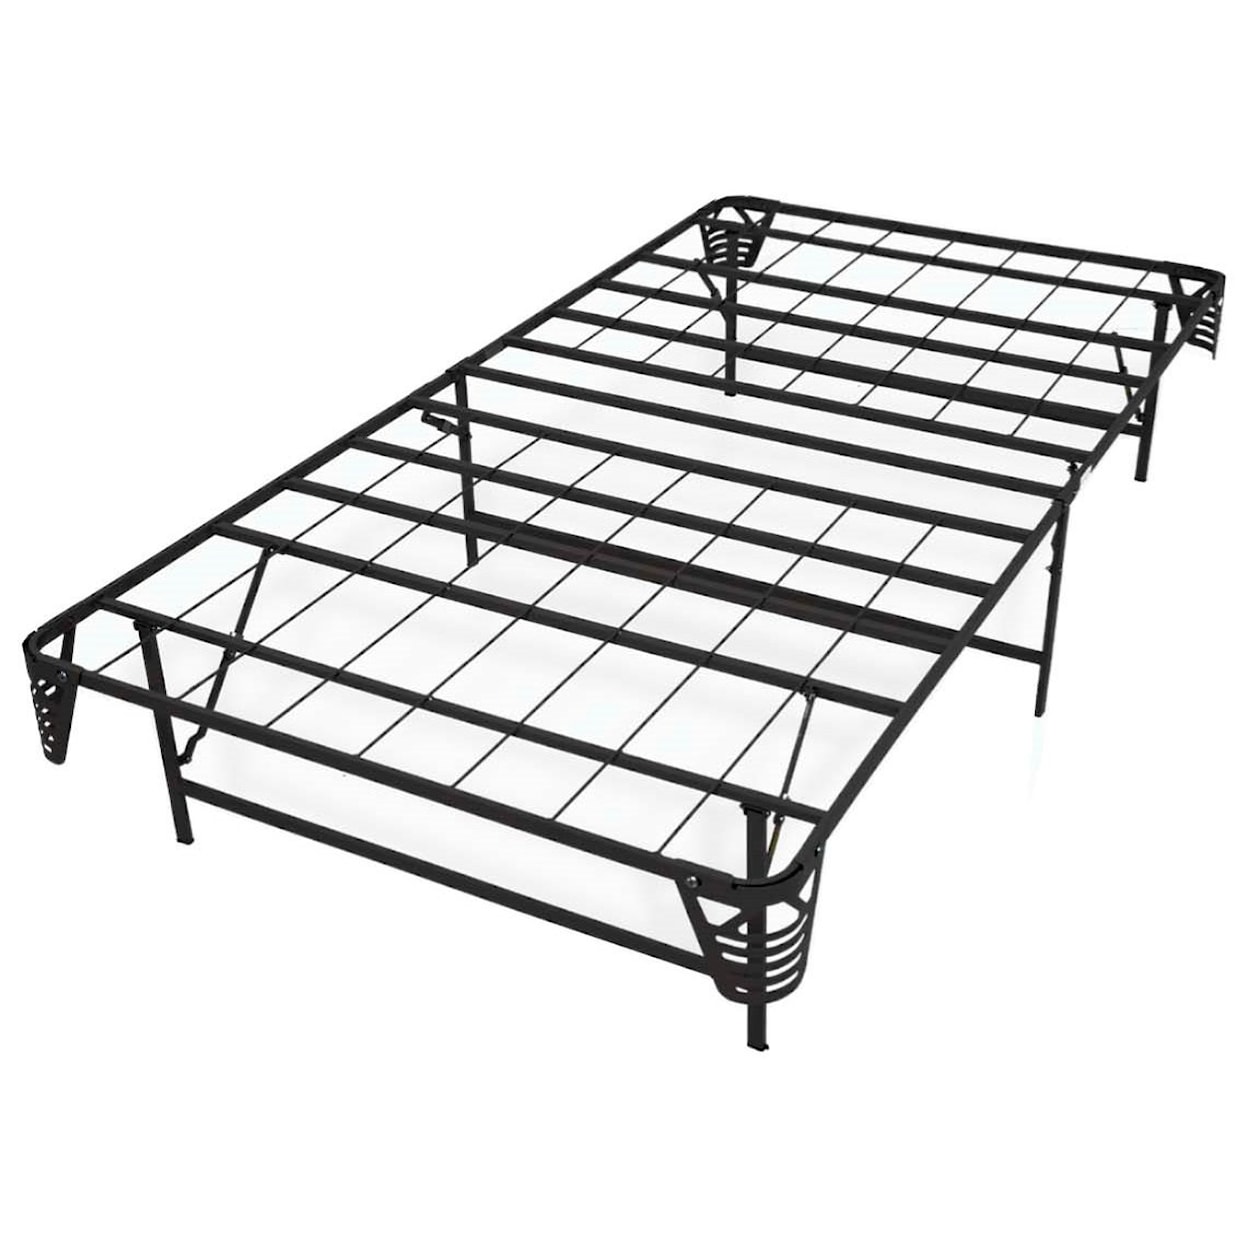 Glideaway Space Saver Bed Frame King/Queen Space Saver Bed Frame